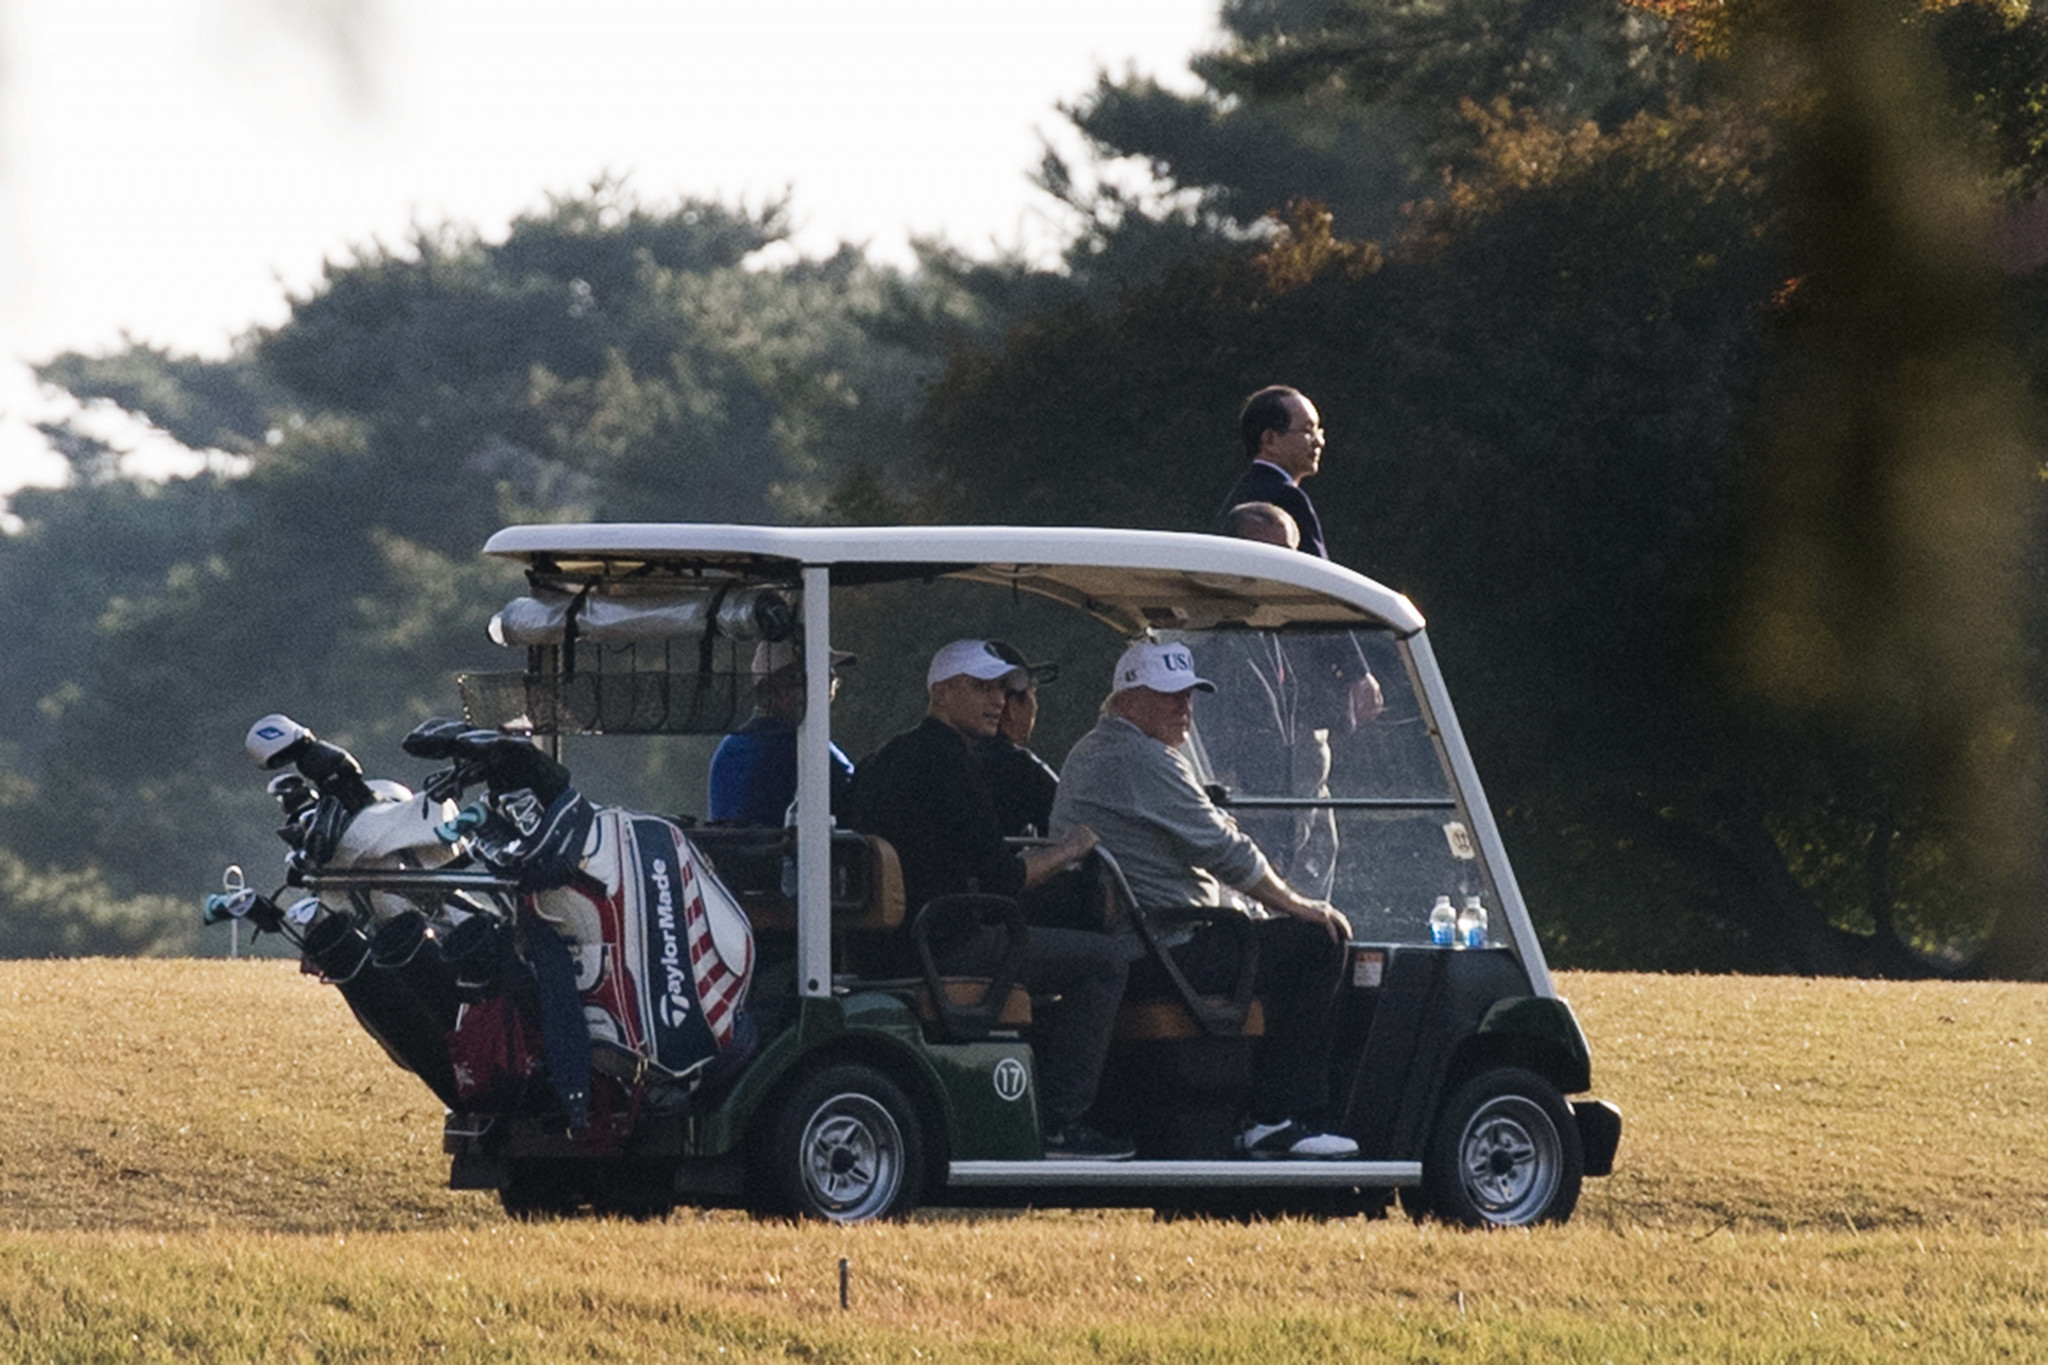 Trump and Abe play round of golf on controversial course set to host Tokyo 2020 tournament